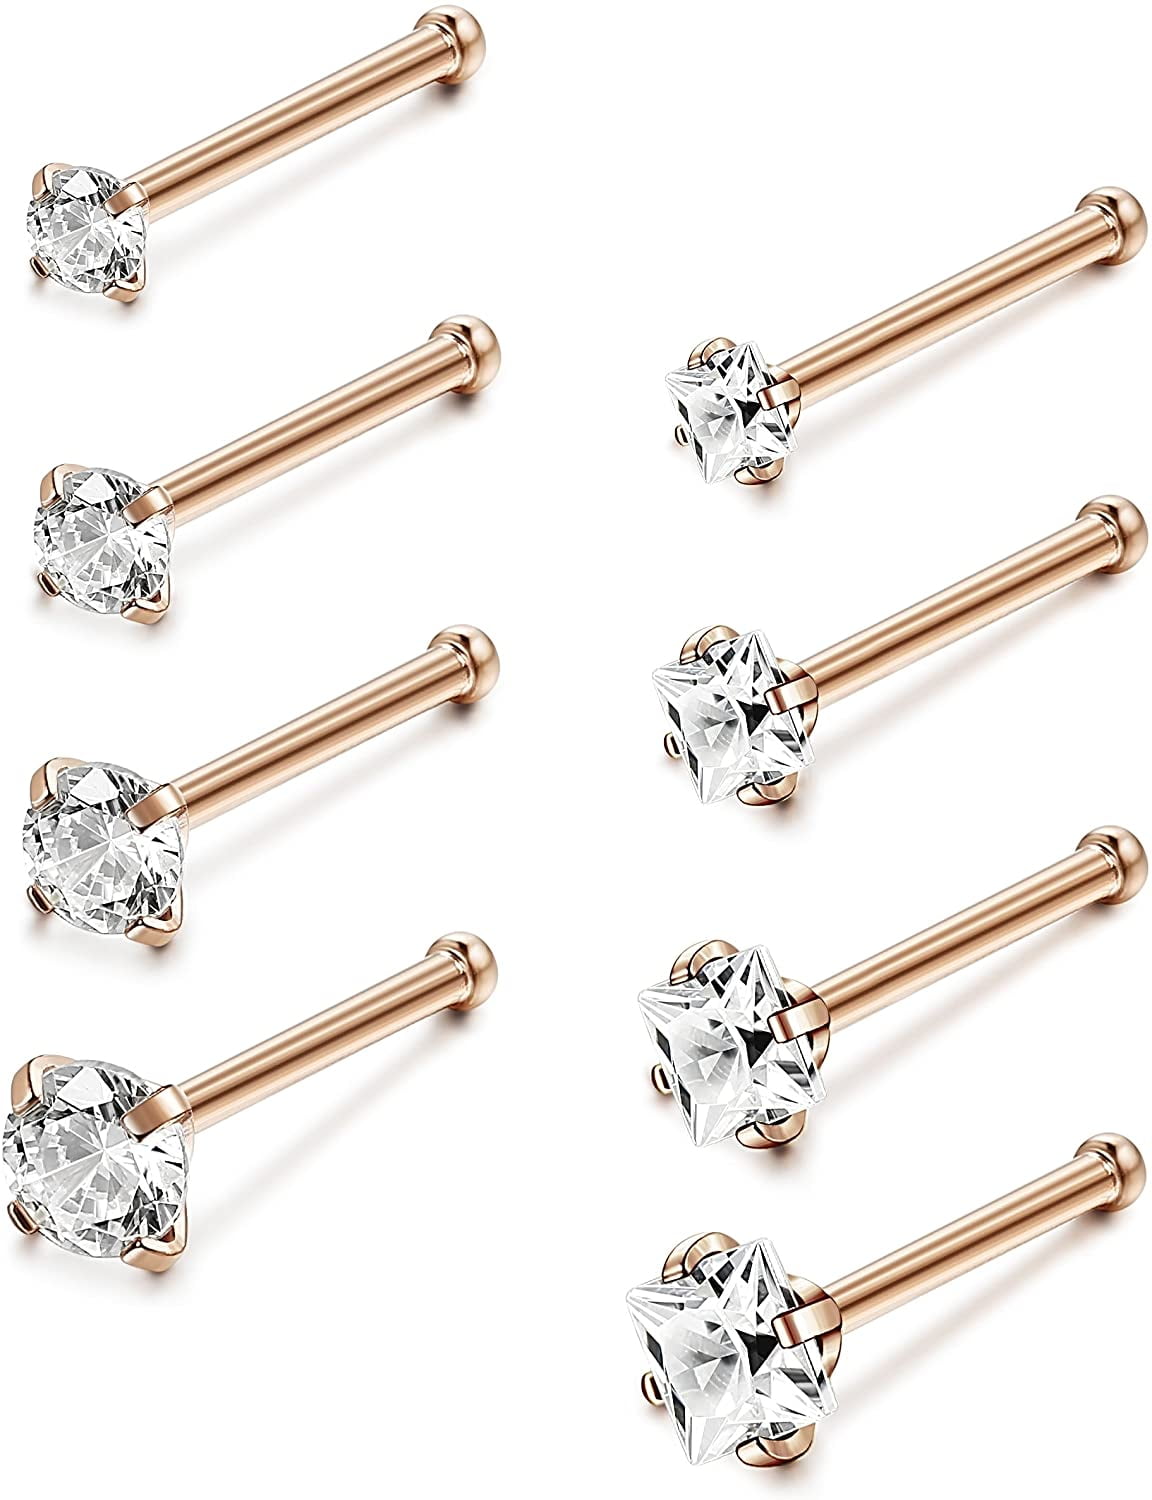 Package of 200pcs Surgical Steel Jeweled Body Piercing in Assorted Styles 